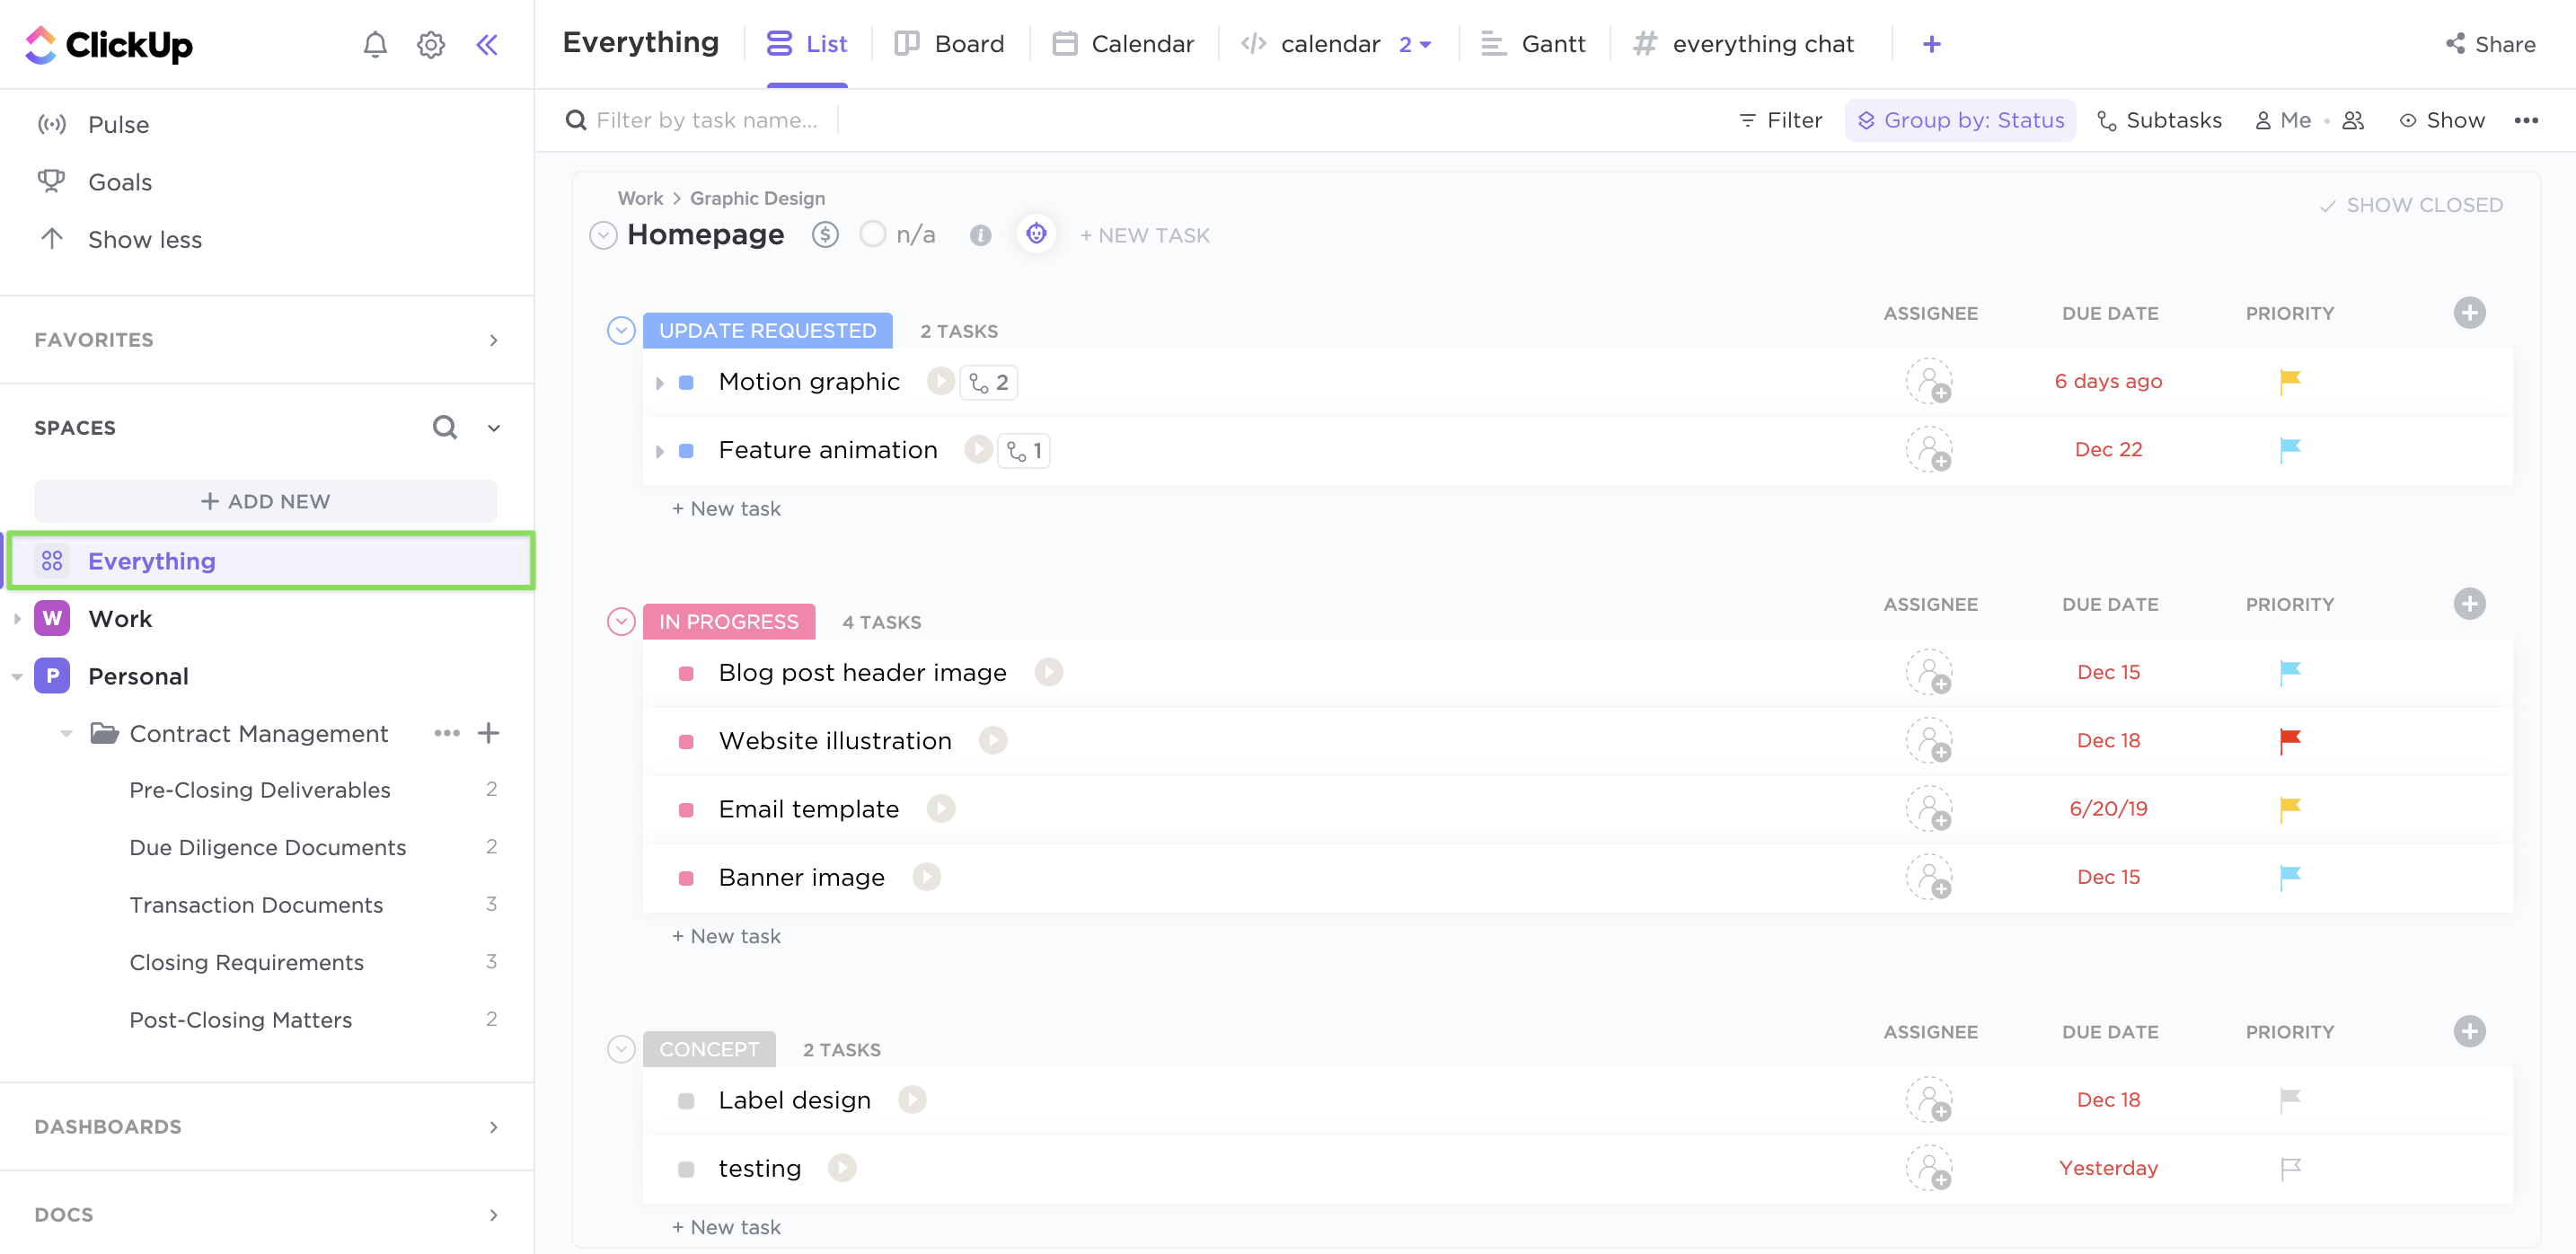 Screenshot of the left Sidebar focusing on Everything view.